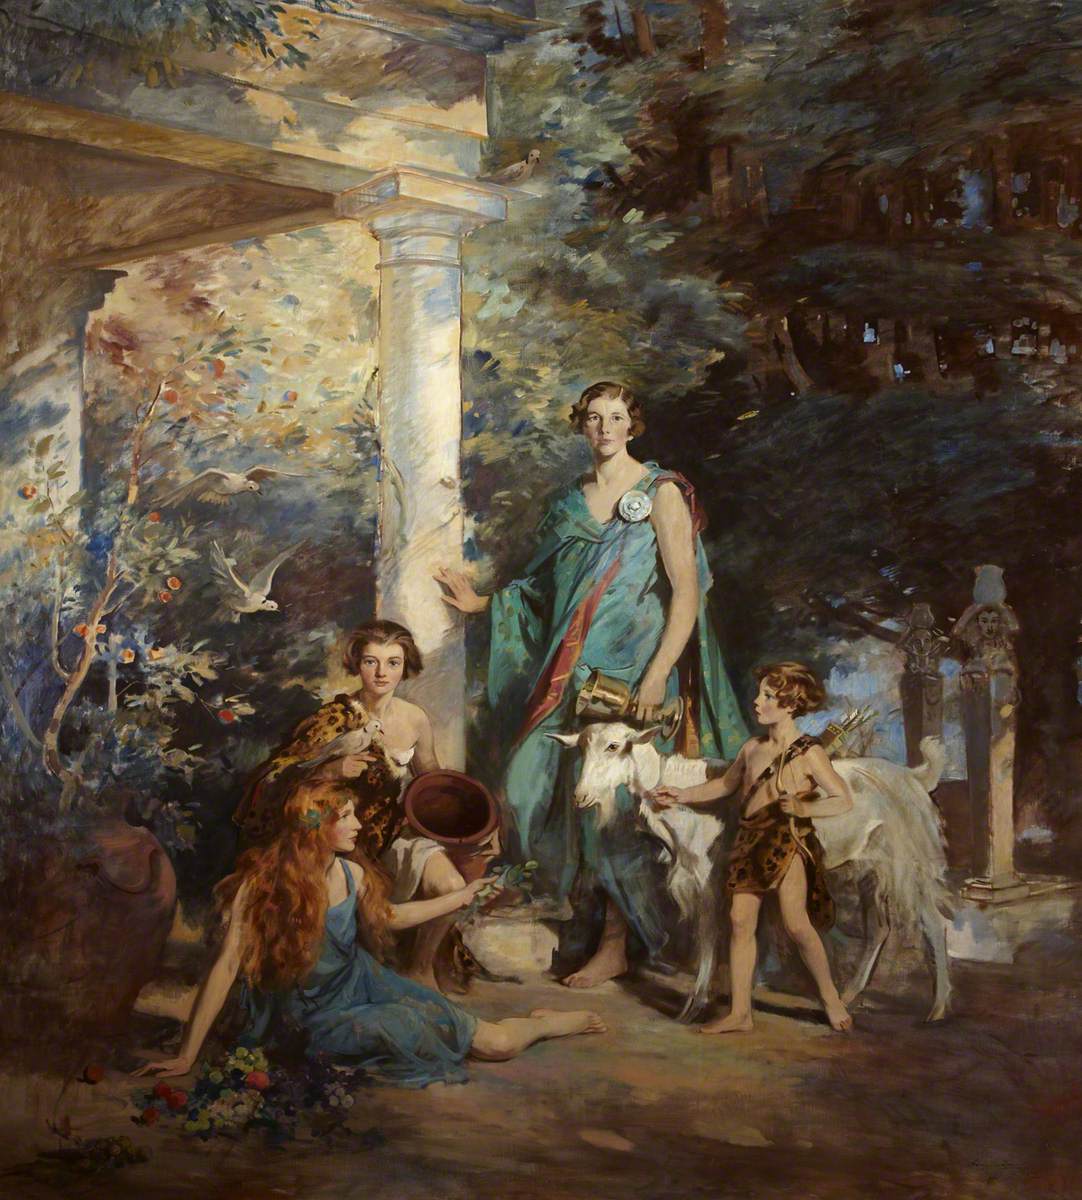 'Circe and the Sirens': A Group Portrait of the Honourable Edith Chaplin (1878–1959), Marchioness of Londonderry, and Her Three Youngest Daughters, Lady Margaret Frances Anne Vane-Tempest-Stewart (1910–1966), Lady Helen Maglona Vane-Tempest-Stewart (1911–1986), and Lady Mairi Elizabeth Vane-Tempest-Stewart (1921–2009), Later Viscountess Bury